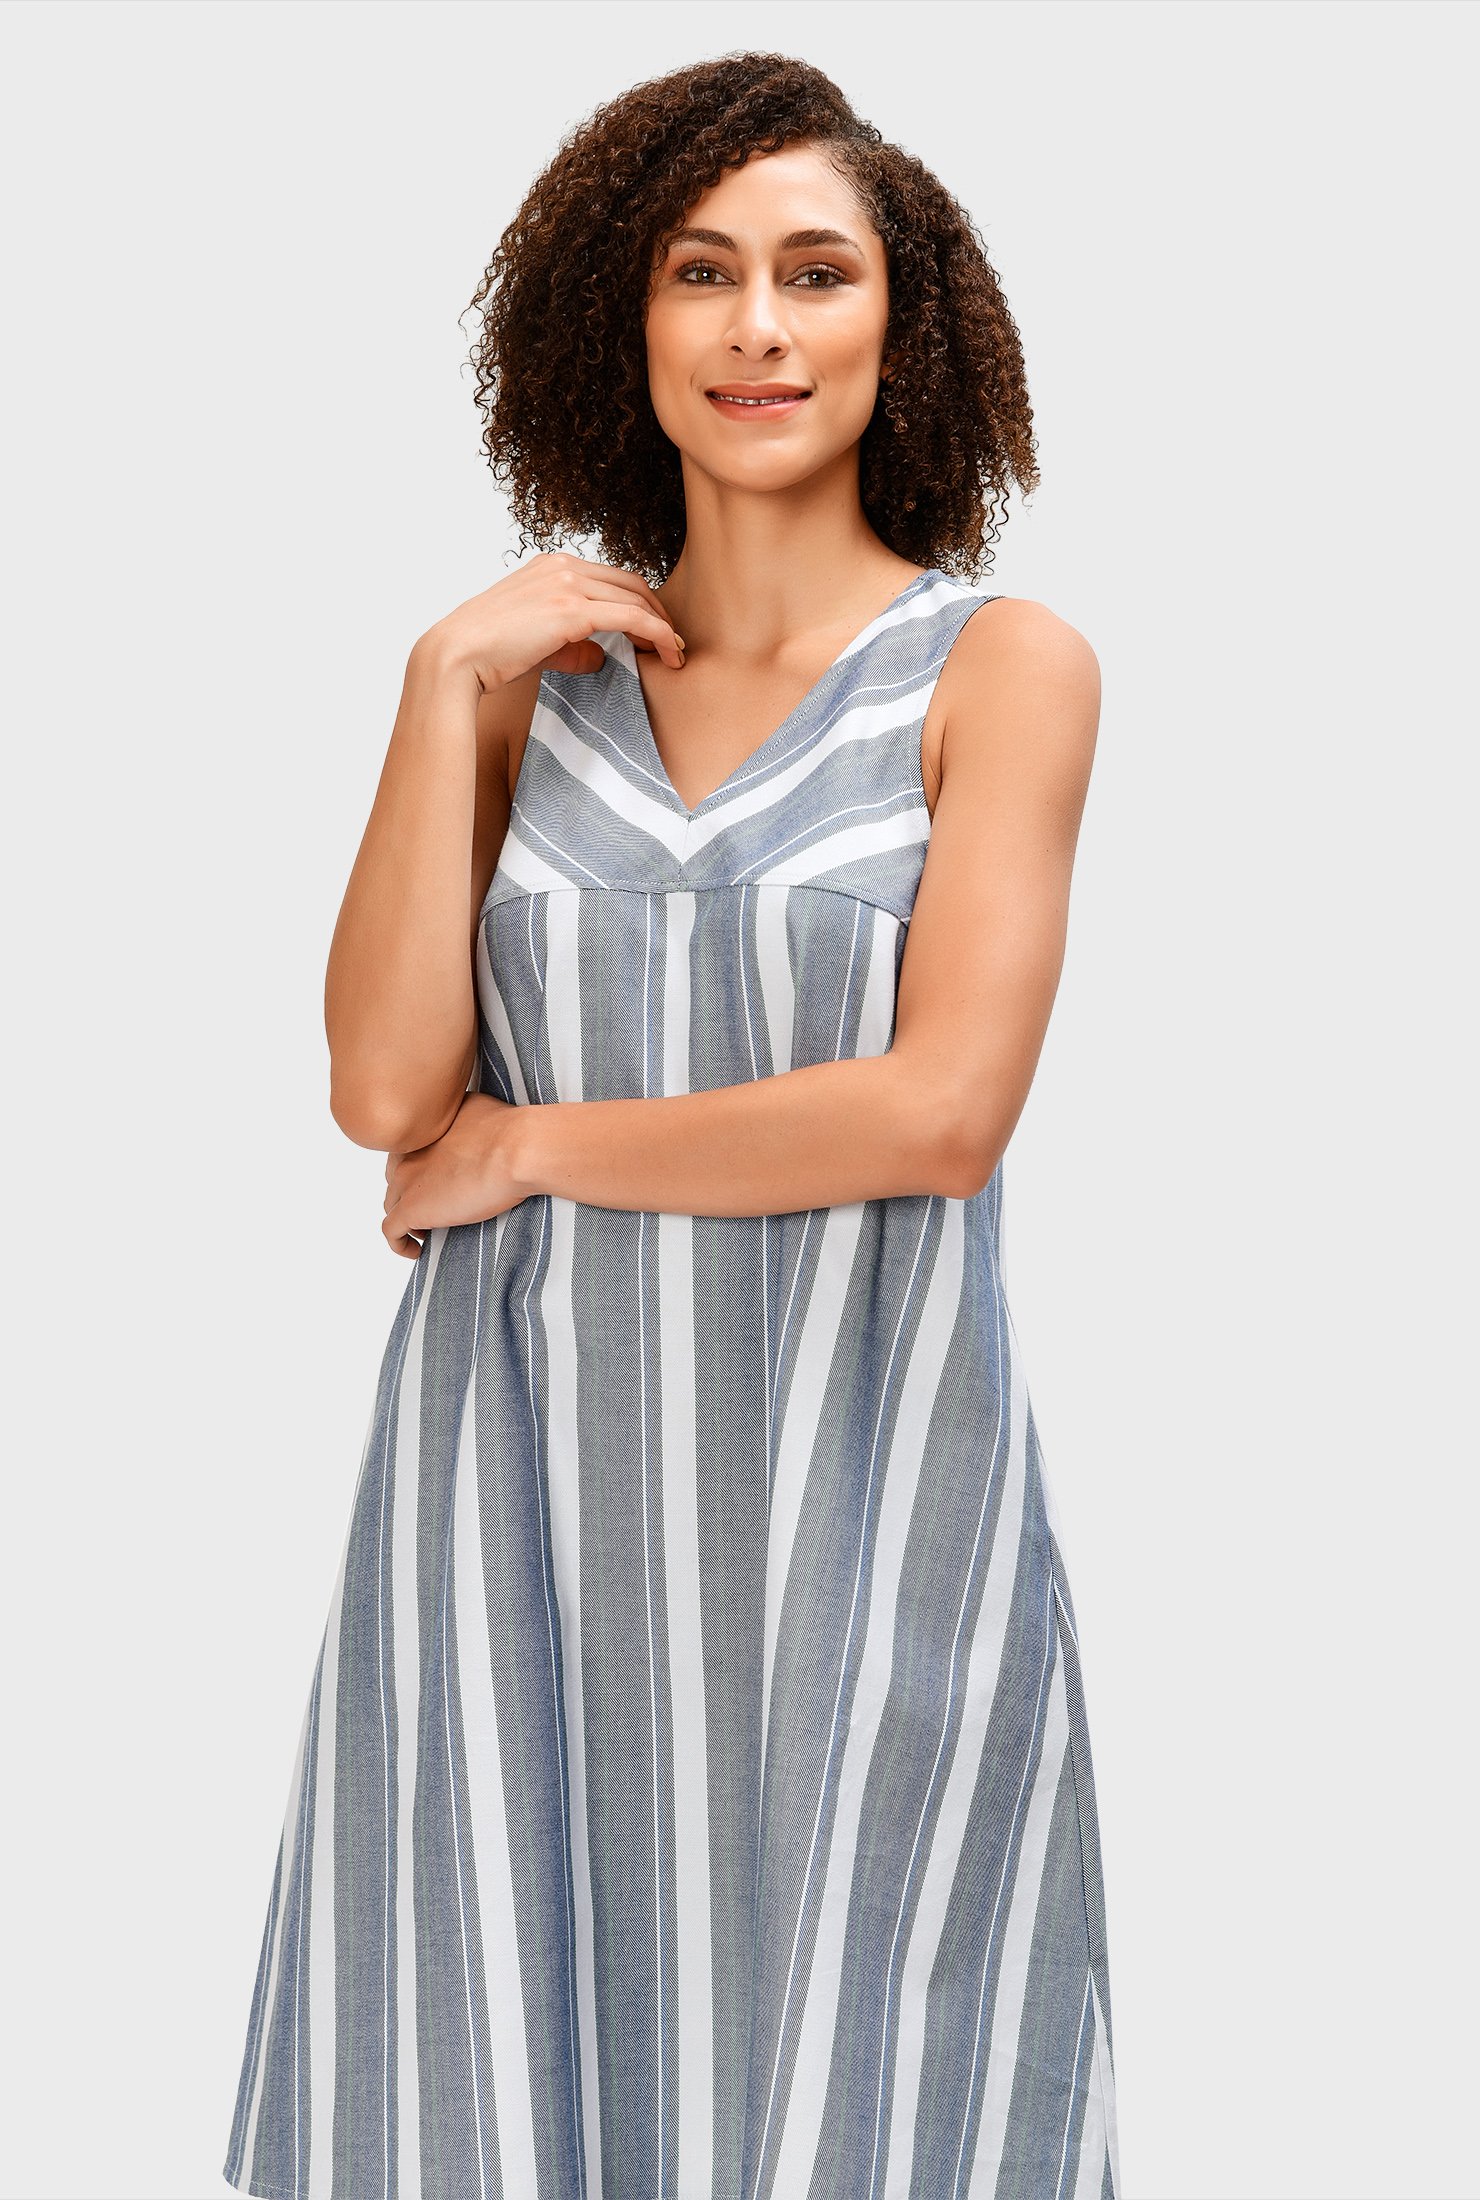 Shift shape to transform your mood! Our versatile stripe cotton twill dress is cut in a relaxed shift silhouette to strike that balance between comfort and style.